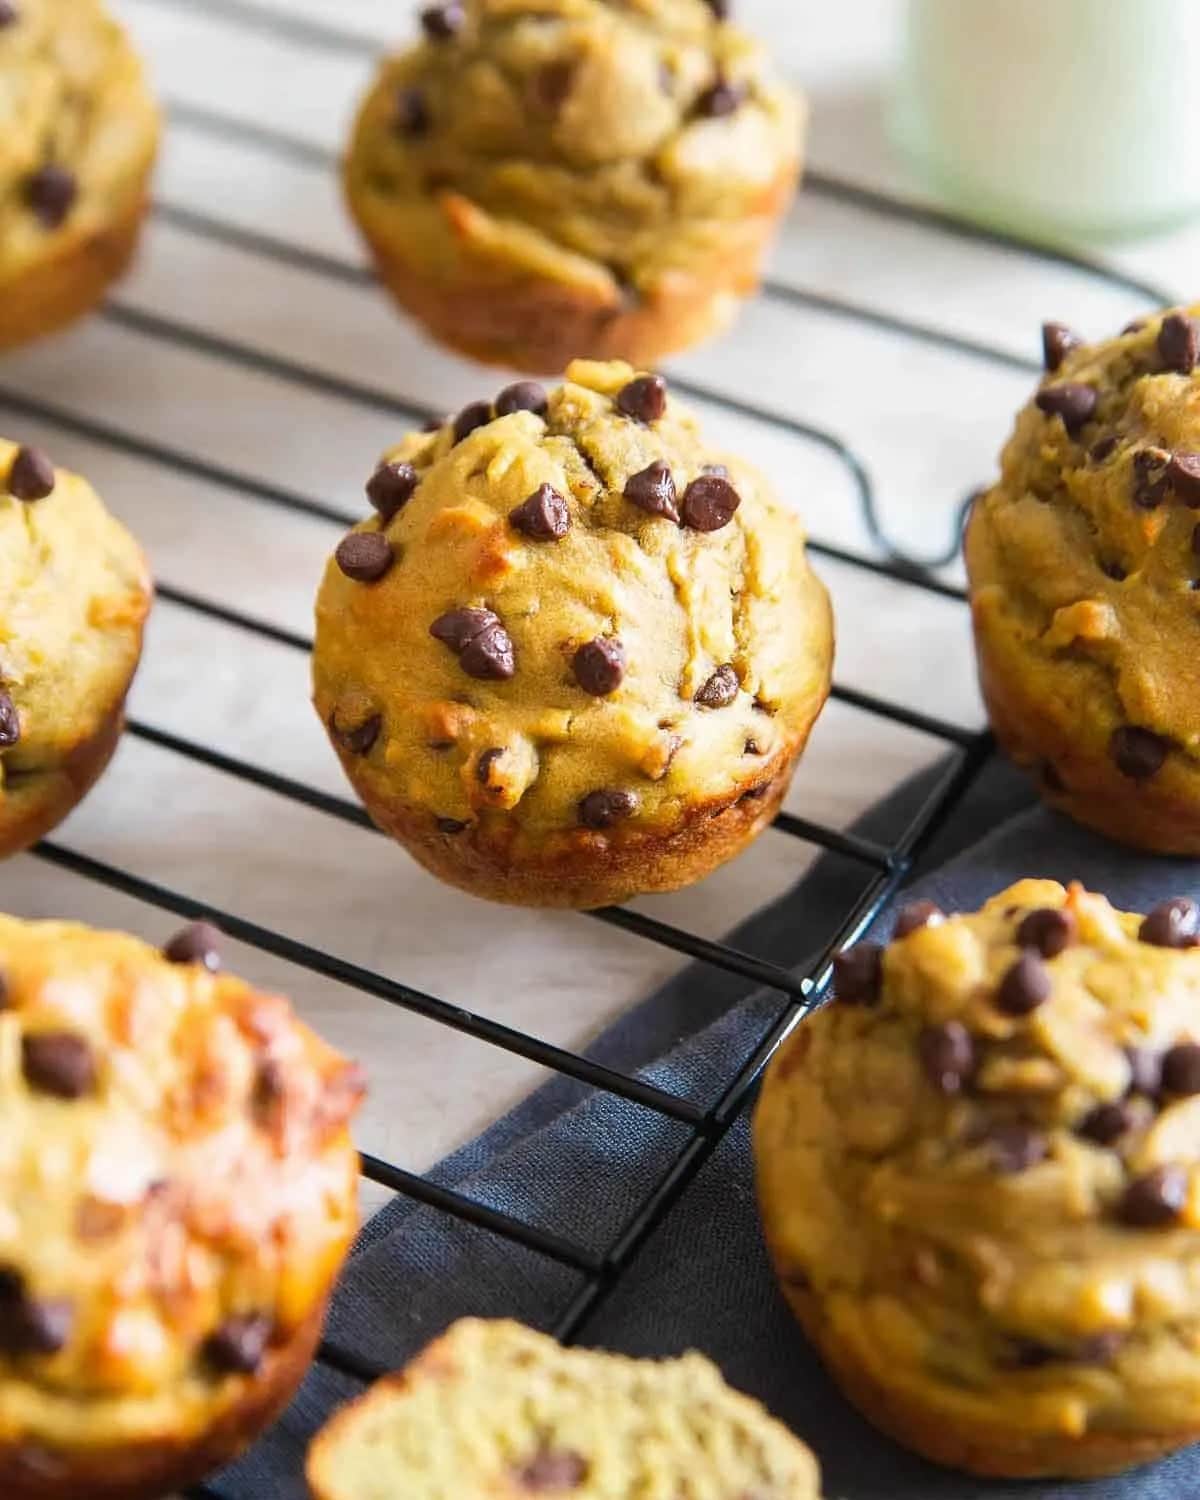 Avocado muffins with chocolate chips on cooling rack.